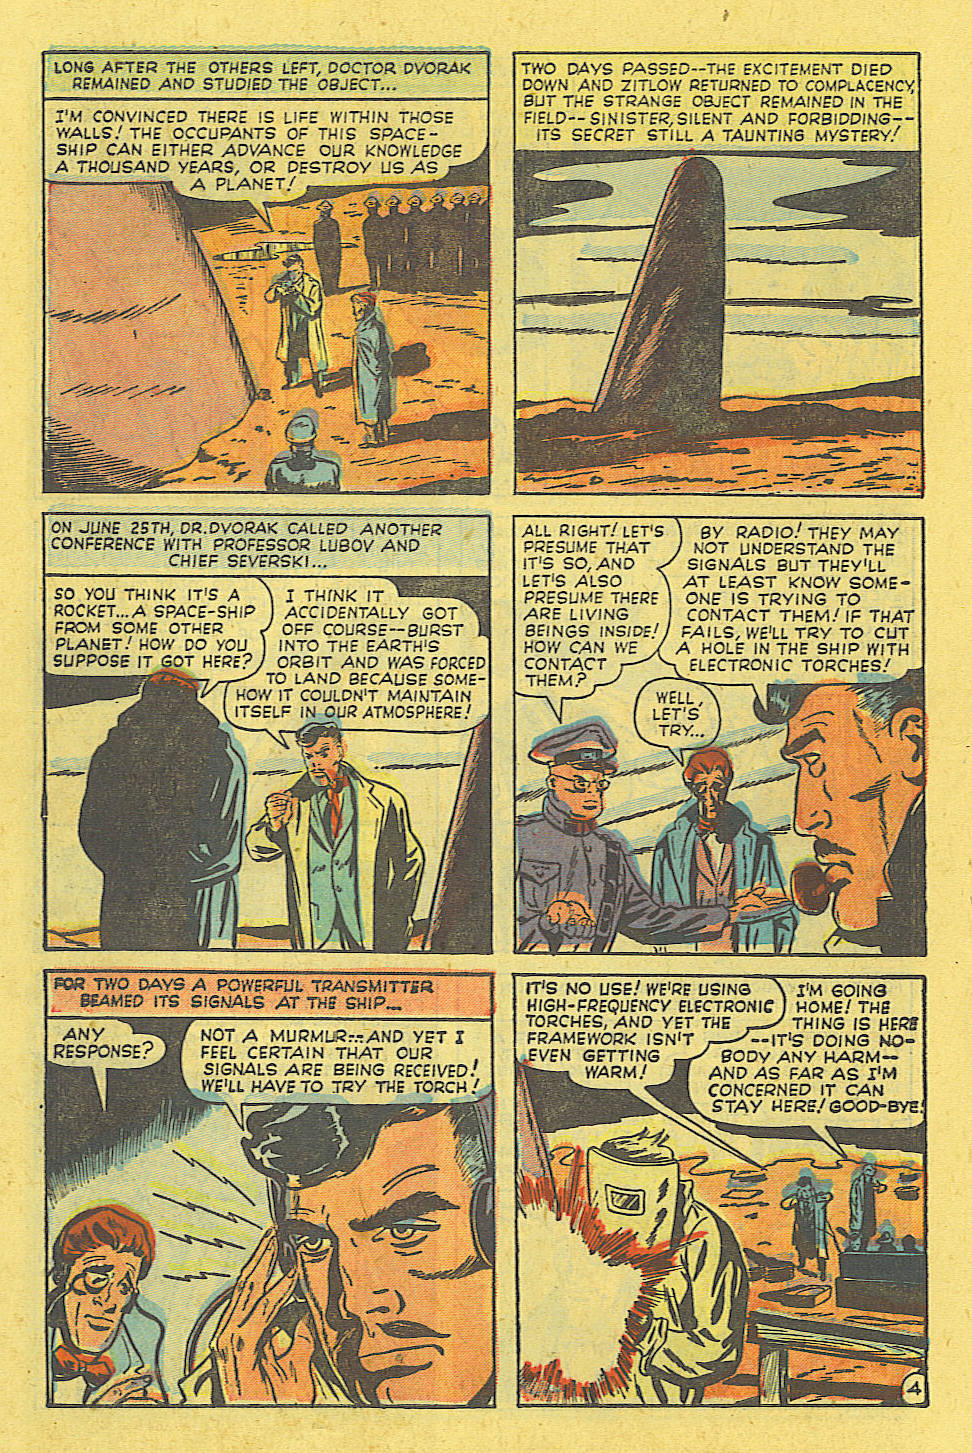 Marvel Tales (1949) 95 Page 4